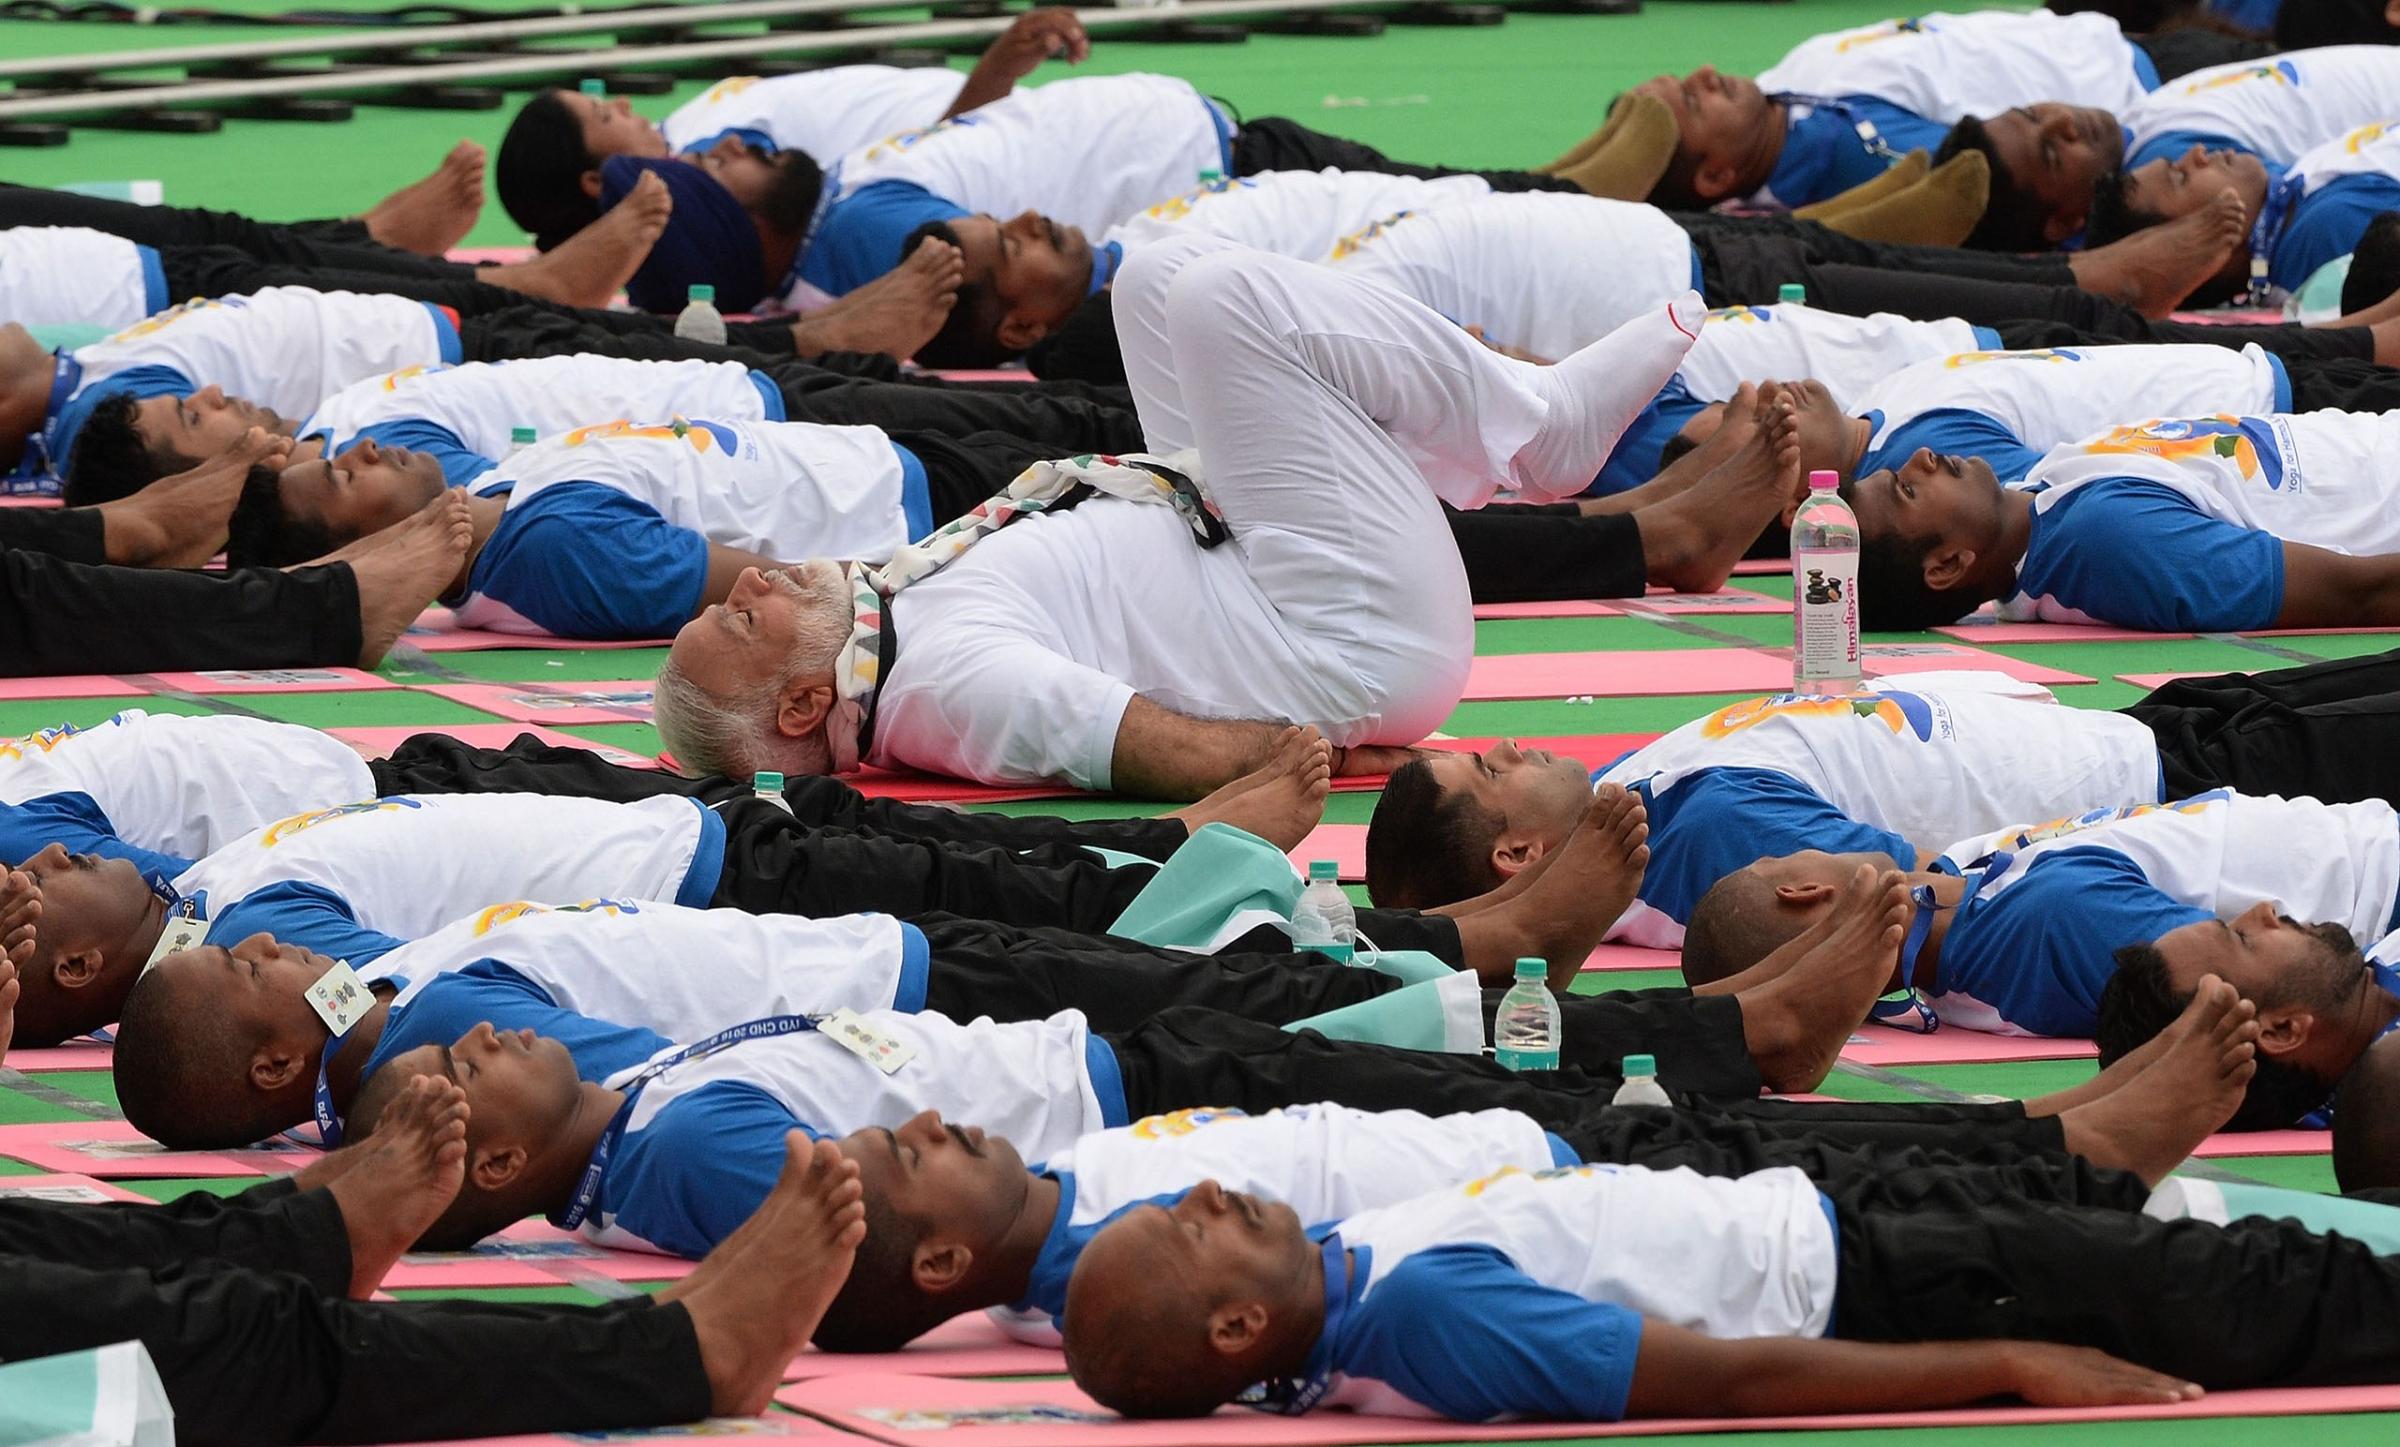 Indian Prime Minister Narendra Modi participates in a mass yoga session along with other Indian yoga practitioners to mark the 2nd International Yoga Day at Captol complex in Chandigarh, India, on June 21, 2016.